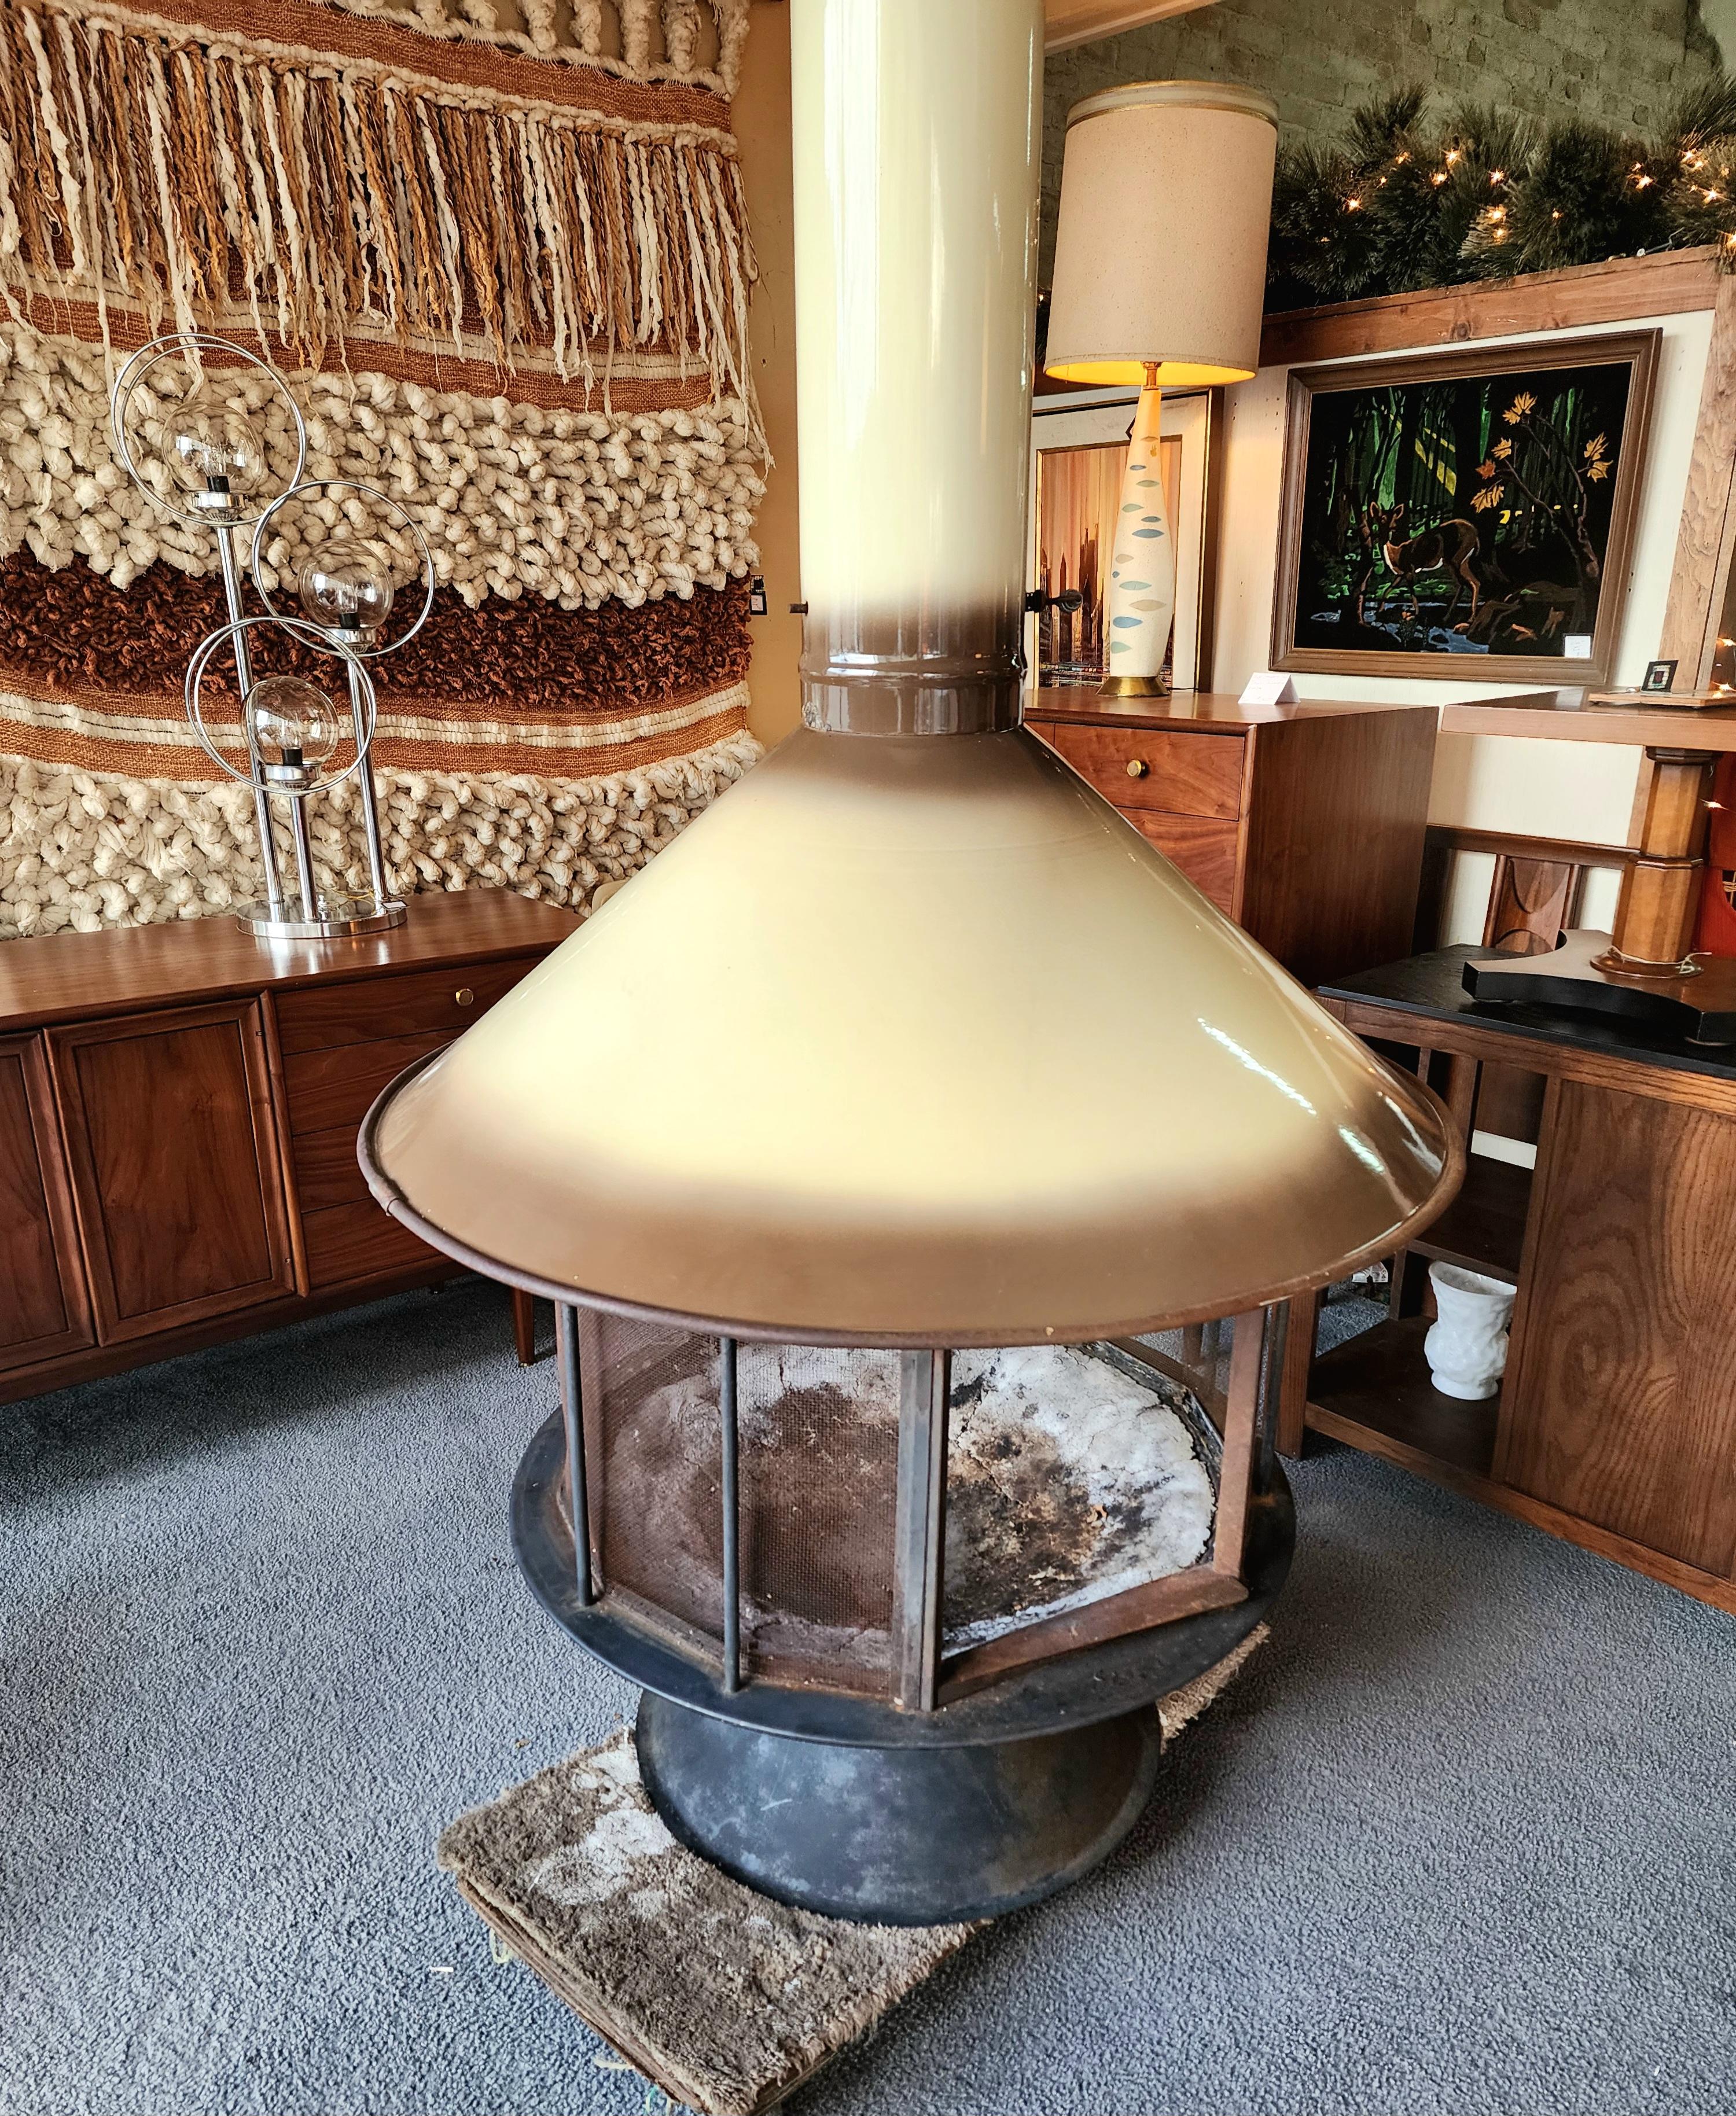 This Imperial Carousel Mid-Century Malm fireplace gives you a 360° view of the fire inside! It has the iconic tulip base with a porcelain color that fades into brown with a cone top. This wonderful design makes an impact inside or out that gives